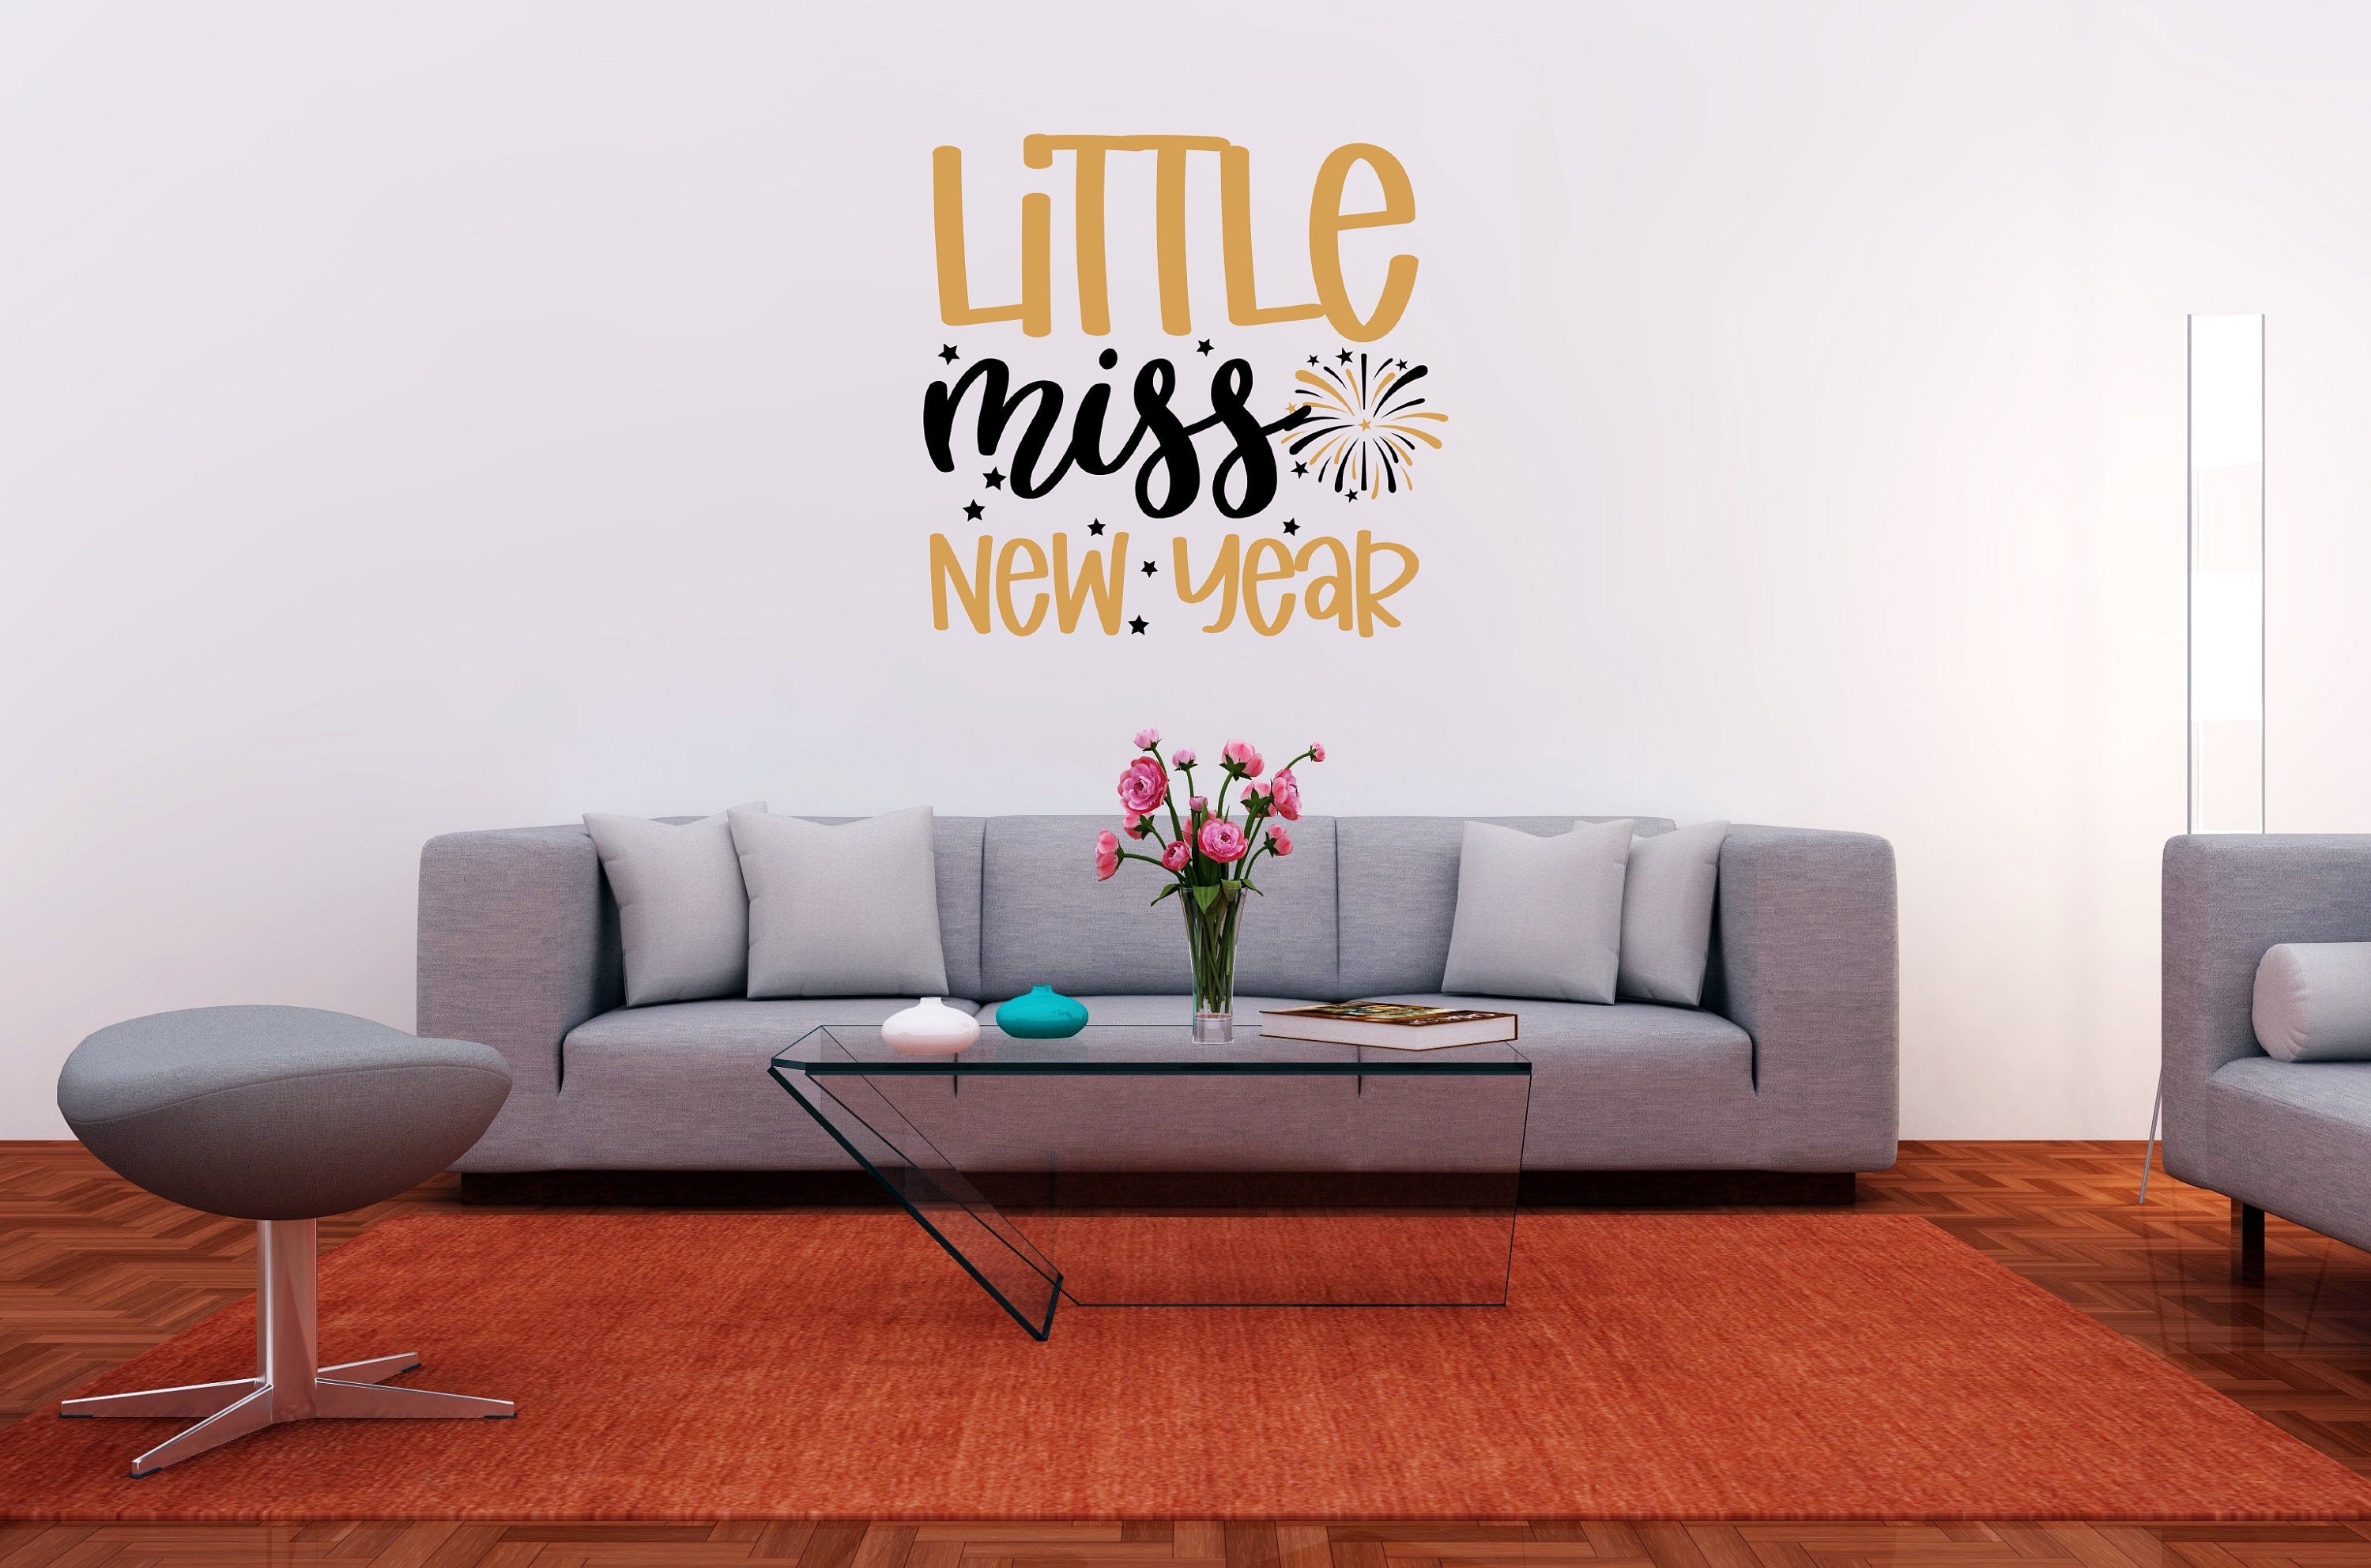 Little Miss New Year Vinyl Decal for DIY Signs, Walls, Wood, Metal, New Year's Eve Party & Event Decor, Gift,